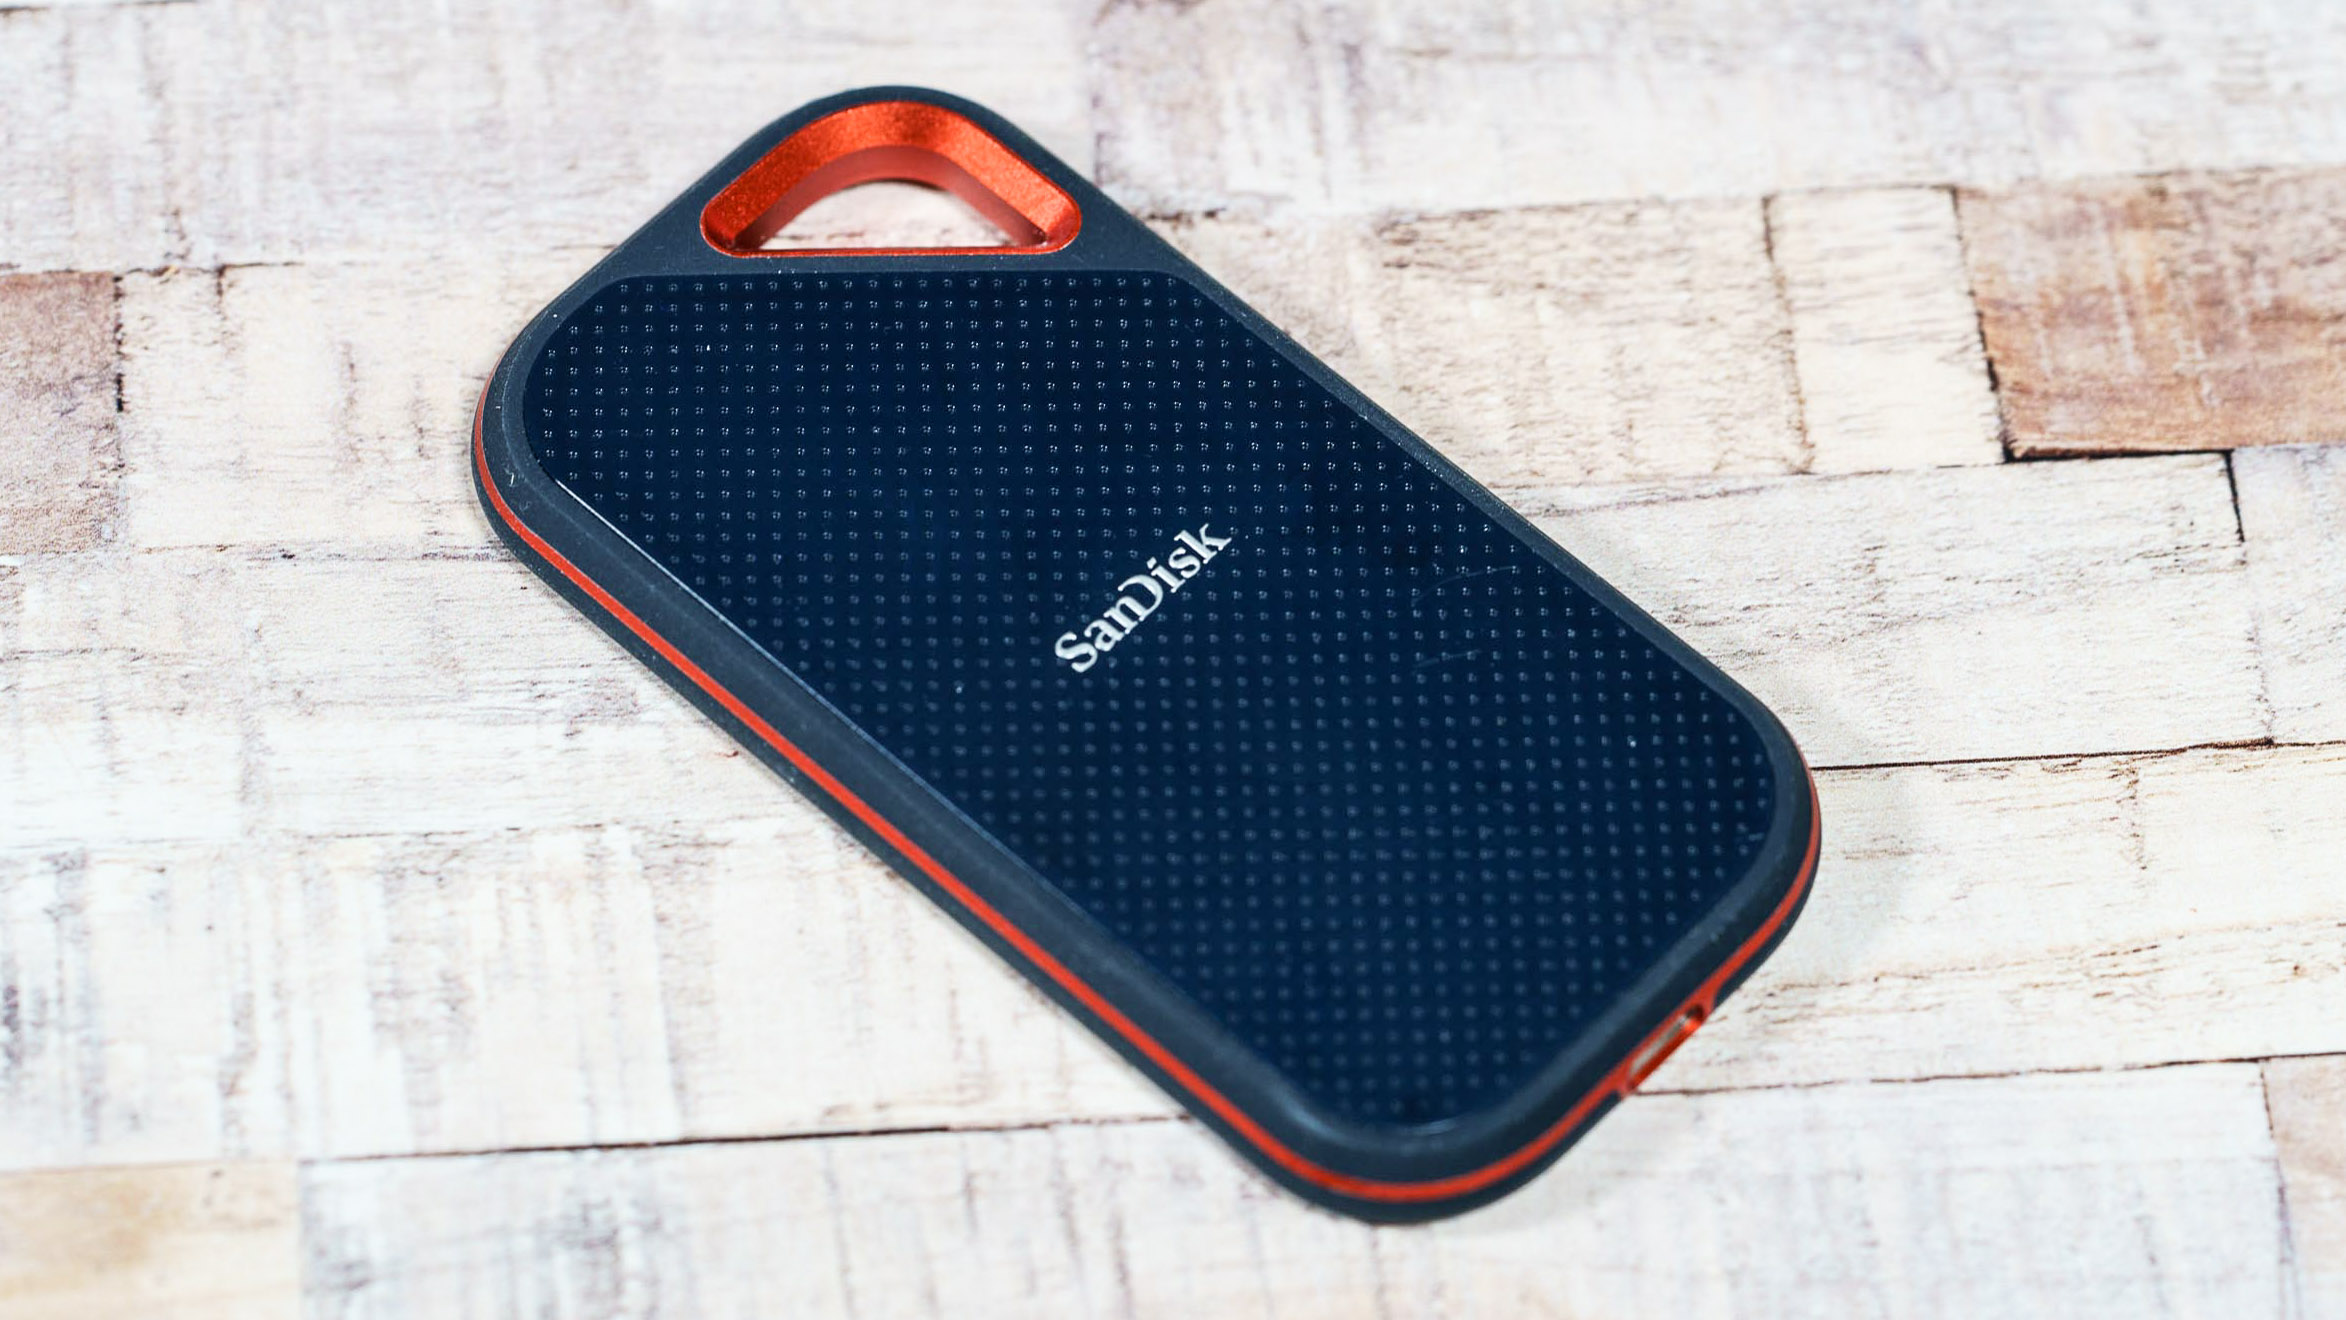 Sandisk Extreme Pro SSD Review - The Best Portable SSD?